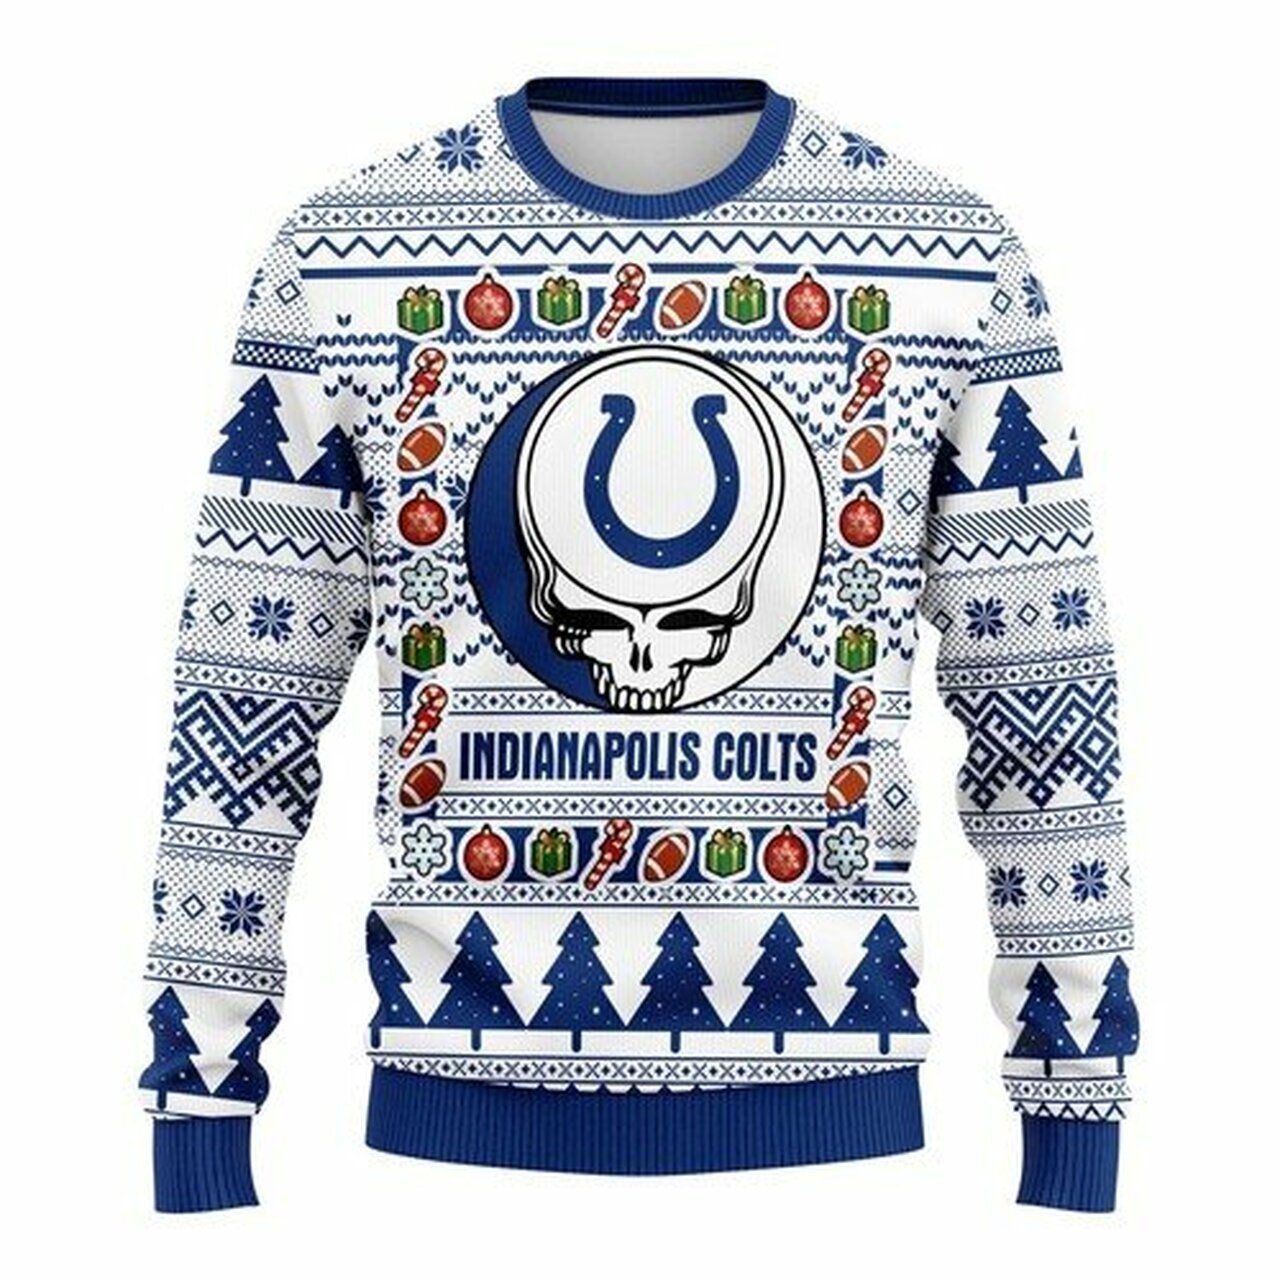 [ HOT ] NFL Indianapolis Colts Grateful Dead ugly christmas sweater – Saleoff 030122